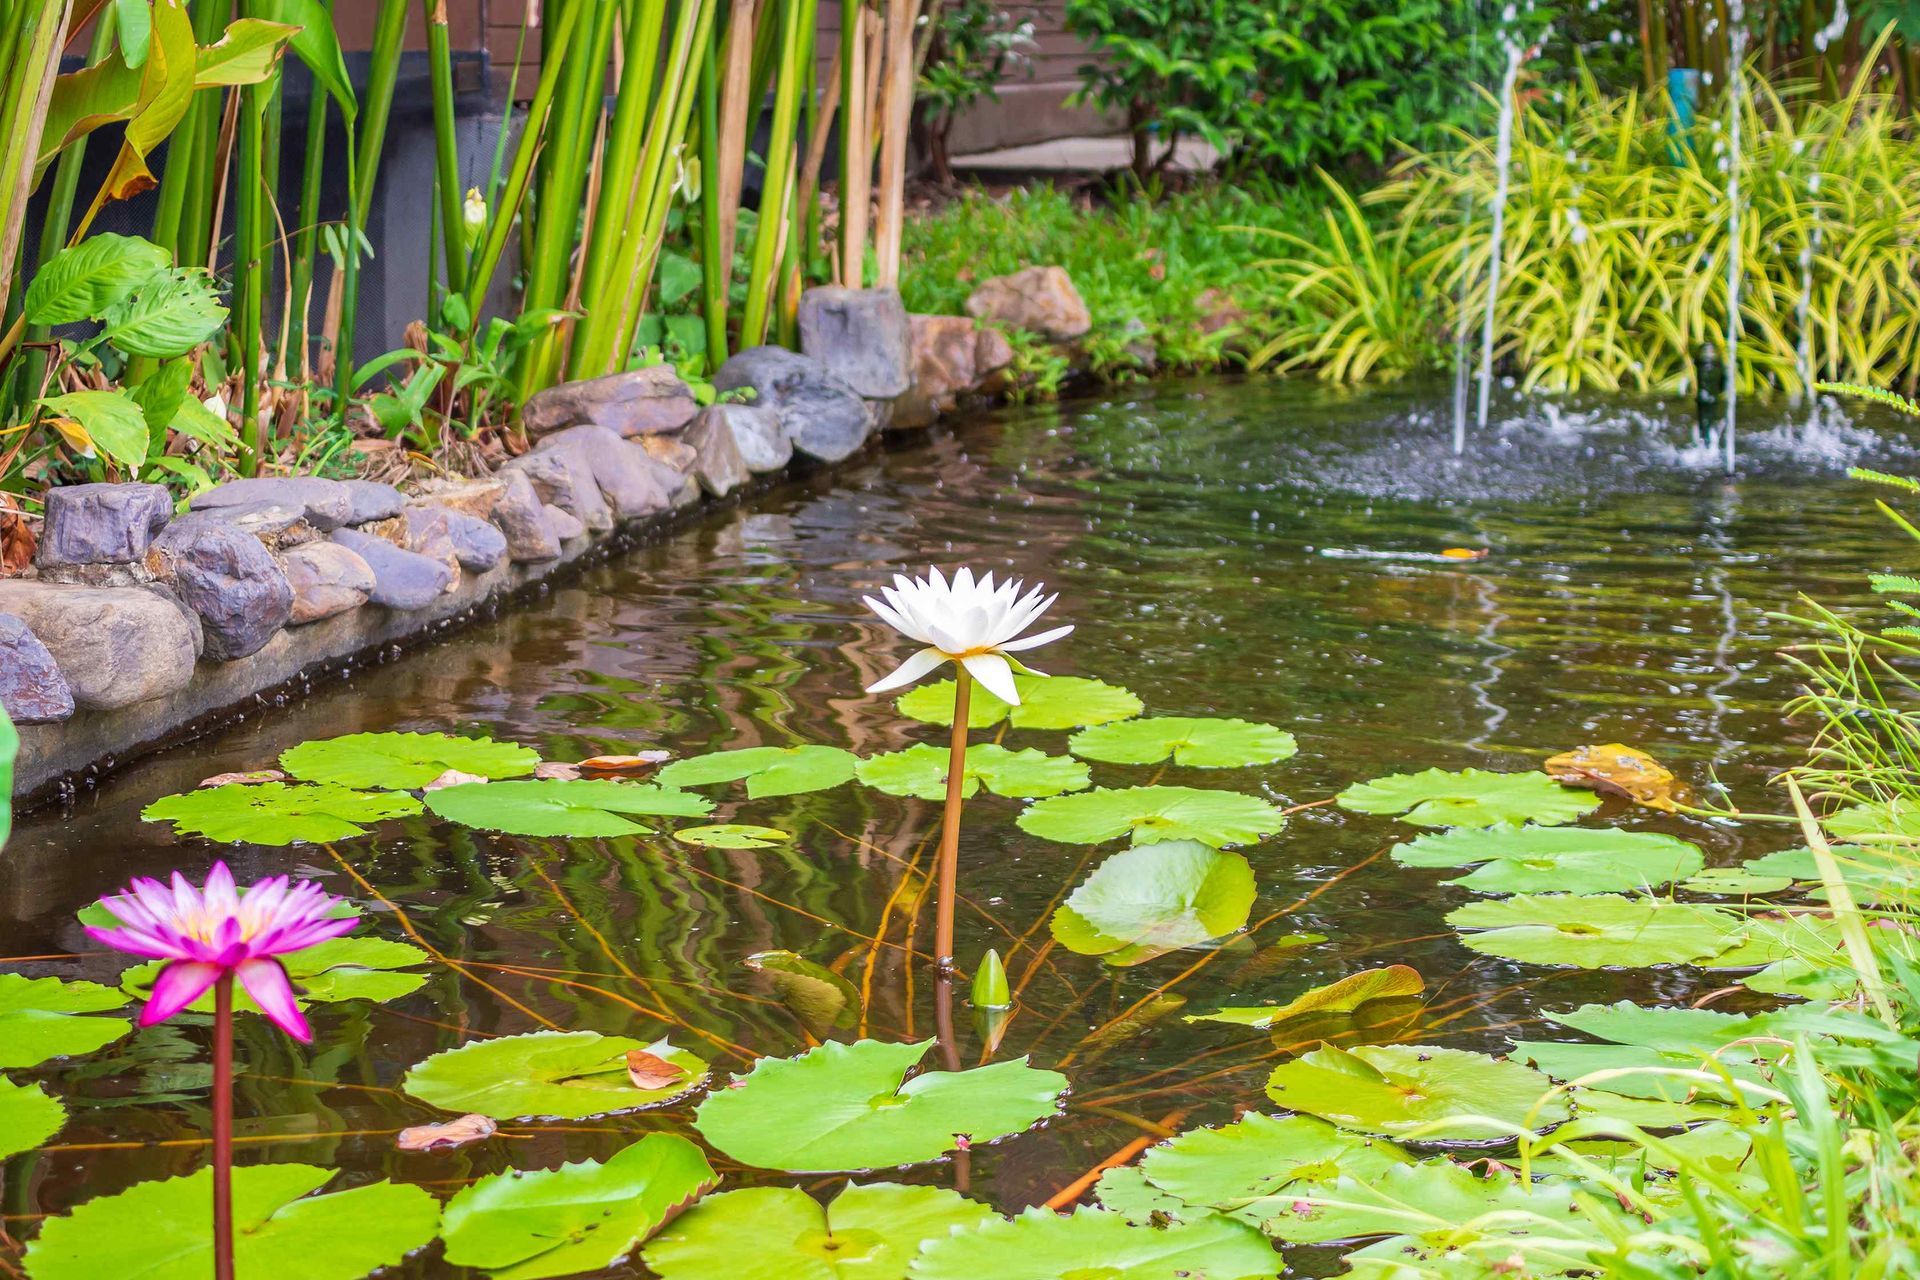 Flowers and lily pads growing in a backyard pond